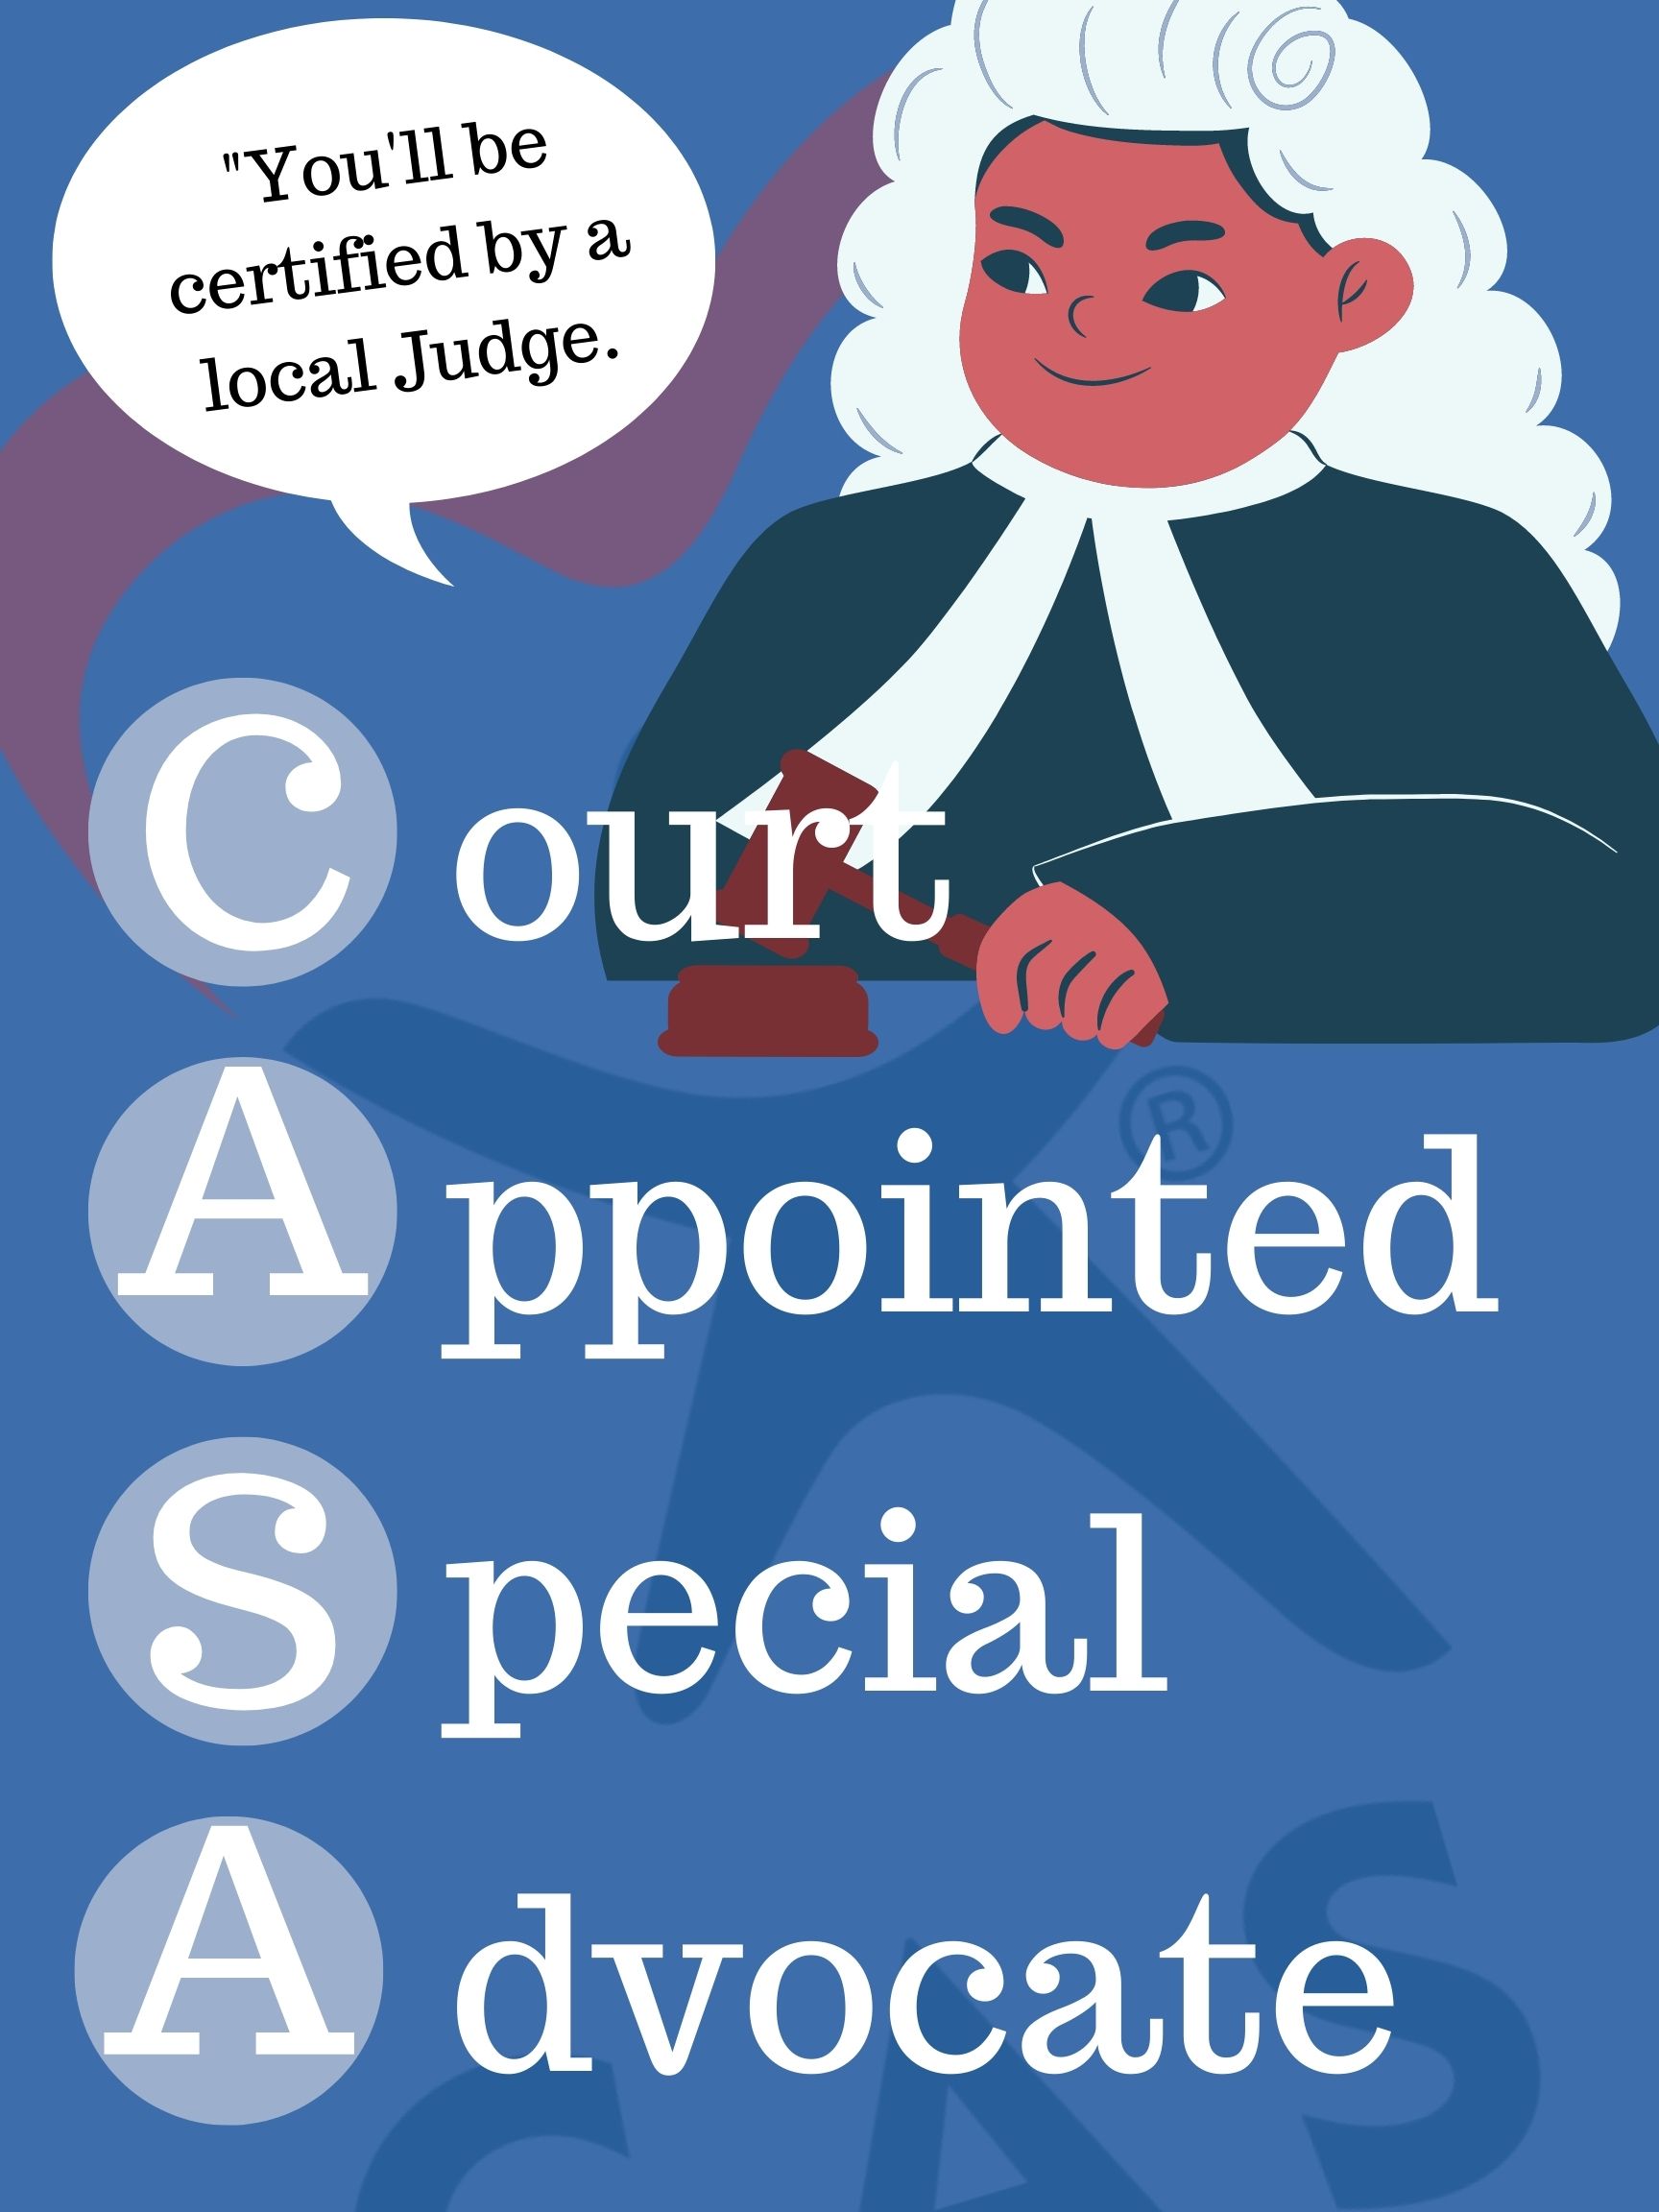 Court appointed special advocate